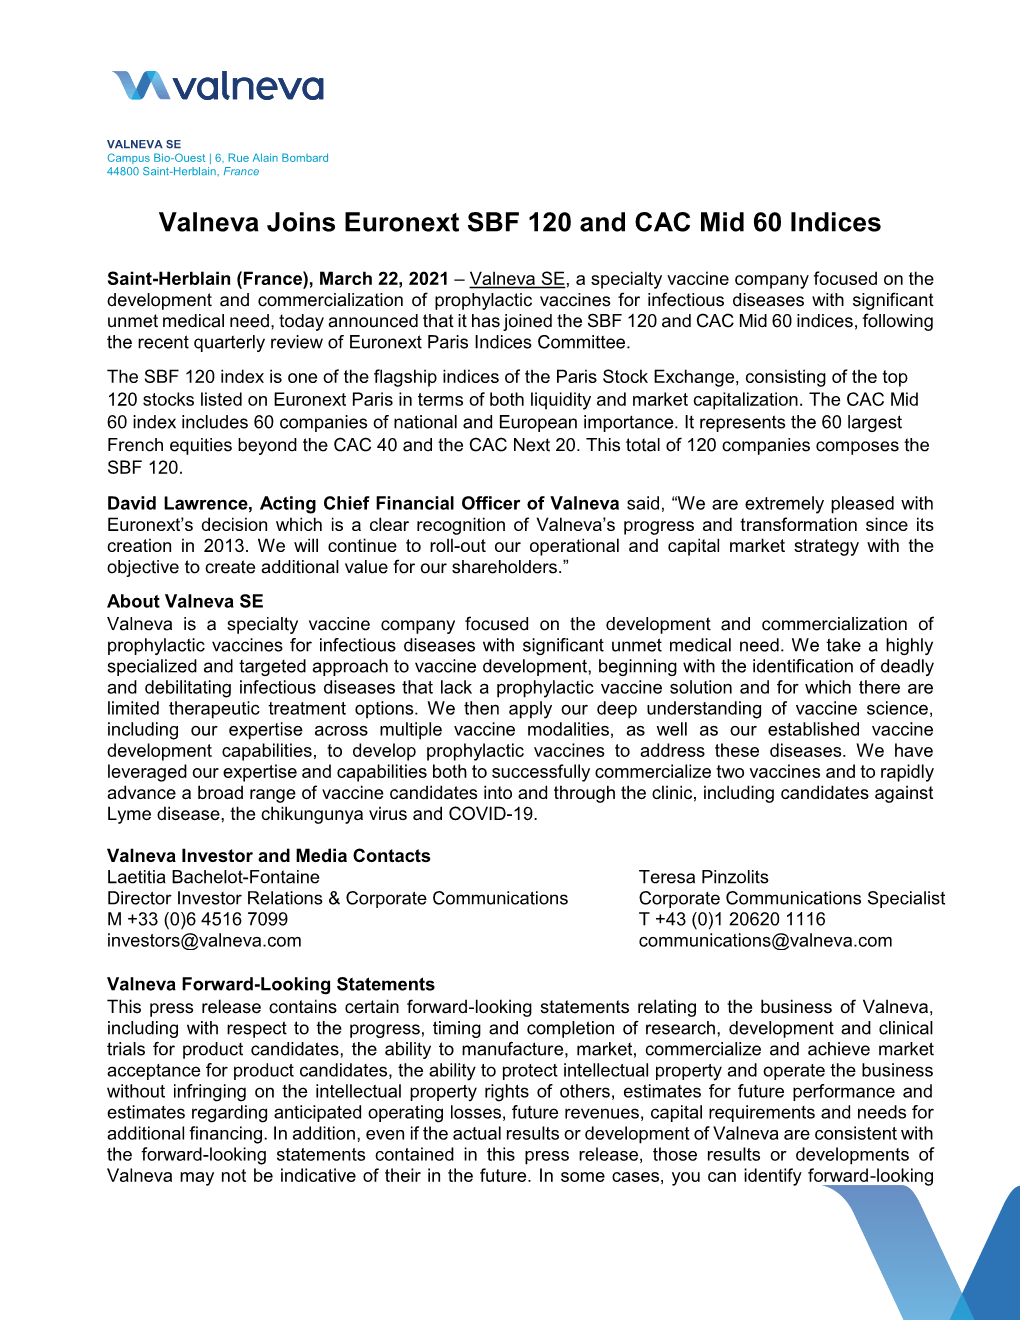 Valneva Joins Euronext SBF 120 and CAC Mid 60 Indices